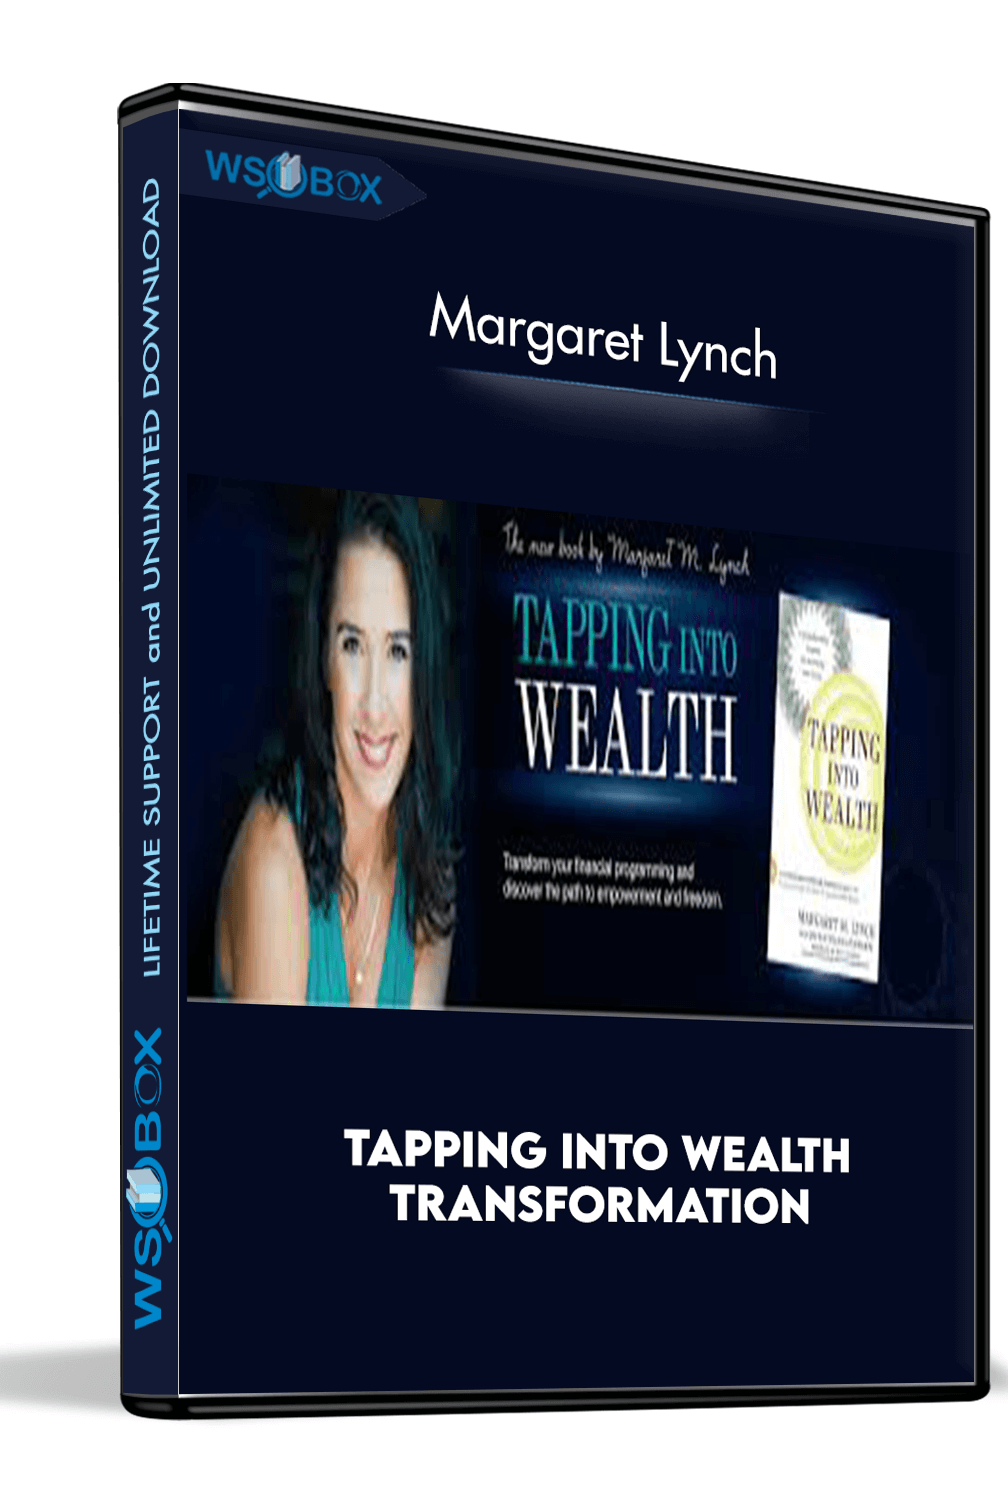 tapping-into-wealth-transformation-margaret-lynch